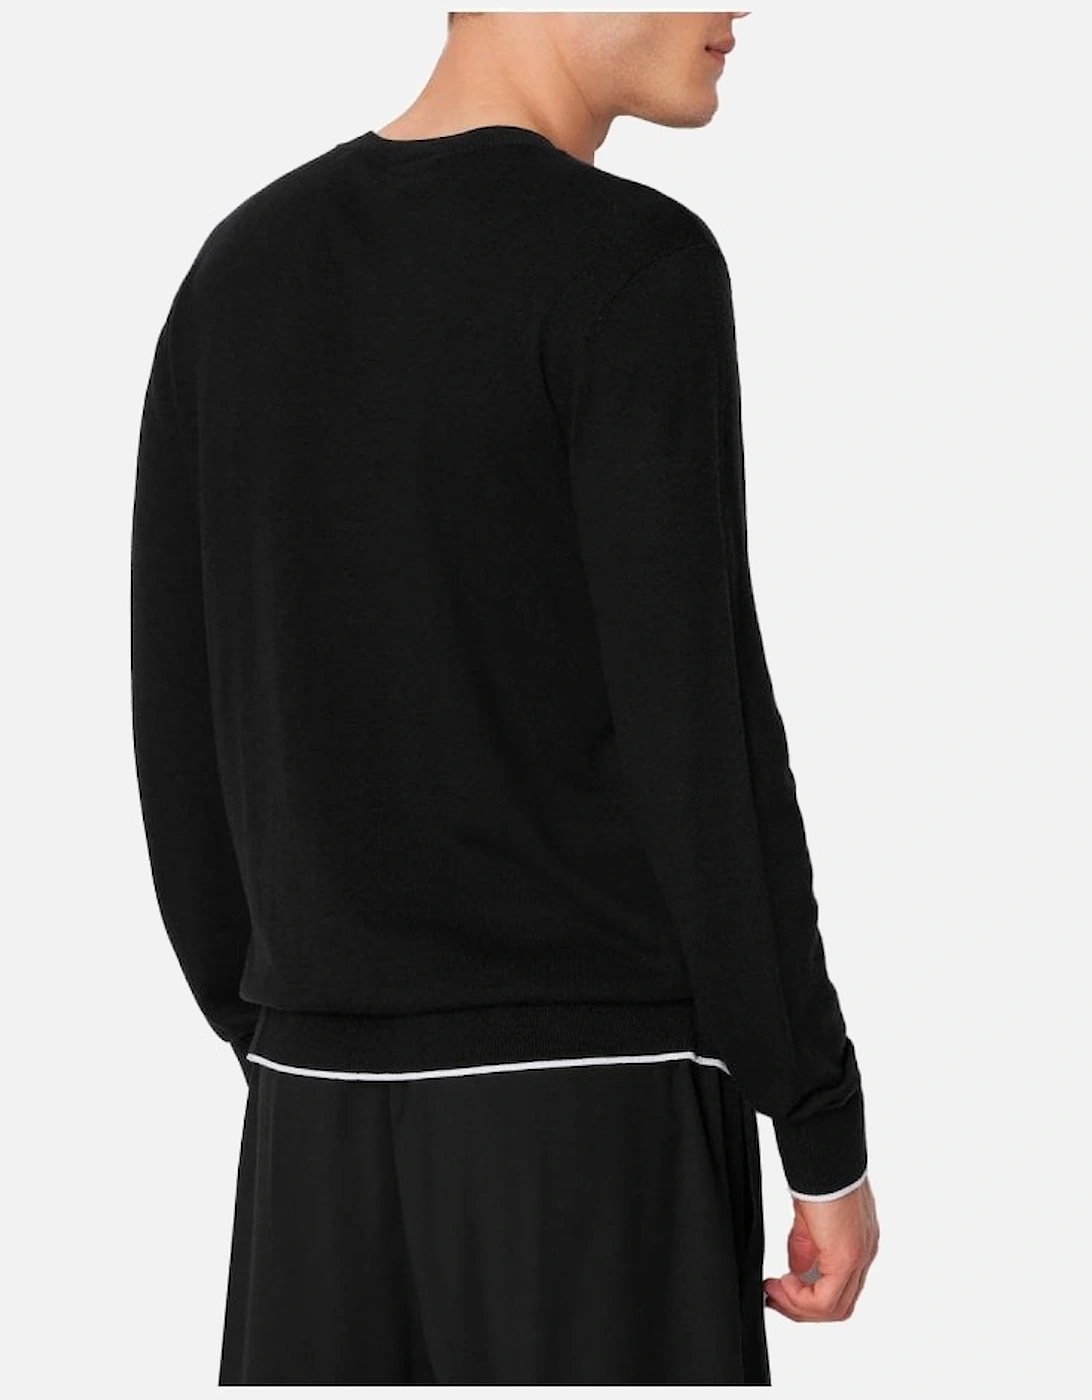 Man Knitted Pullover Black